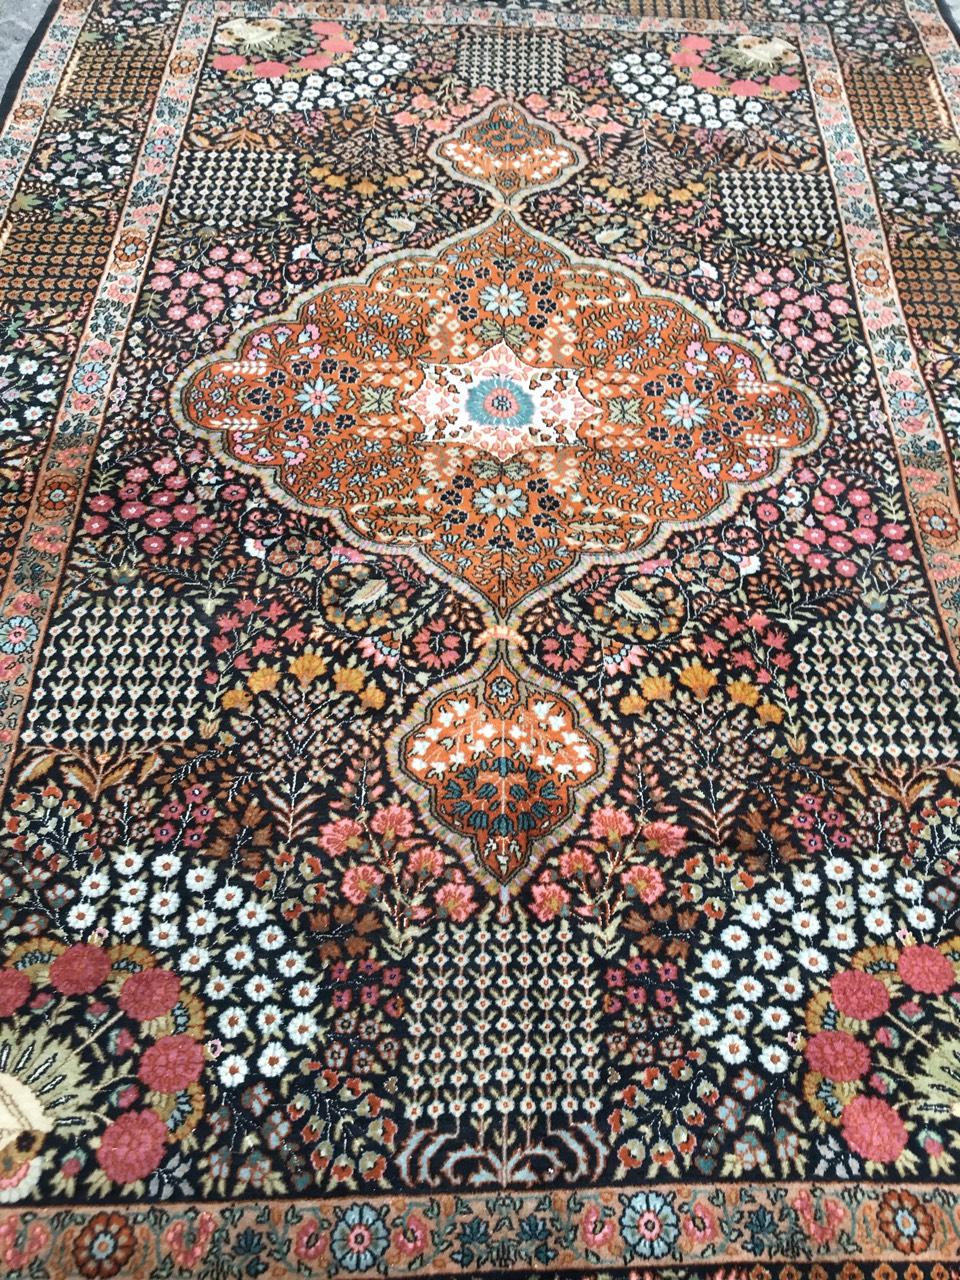 Very nice and beautiful late 20th century Indian Punjab rug with a floral Kerman design and beautiful colors, finely hand knotted with wool velvet on cotton foundation.